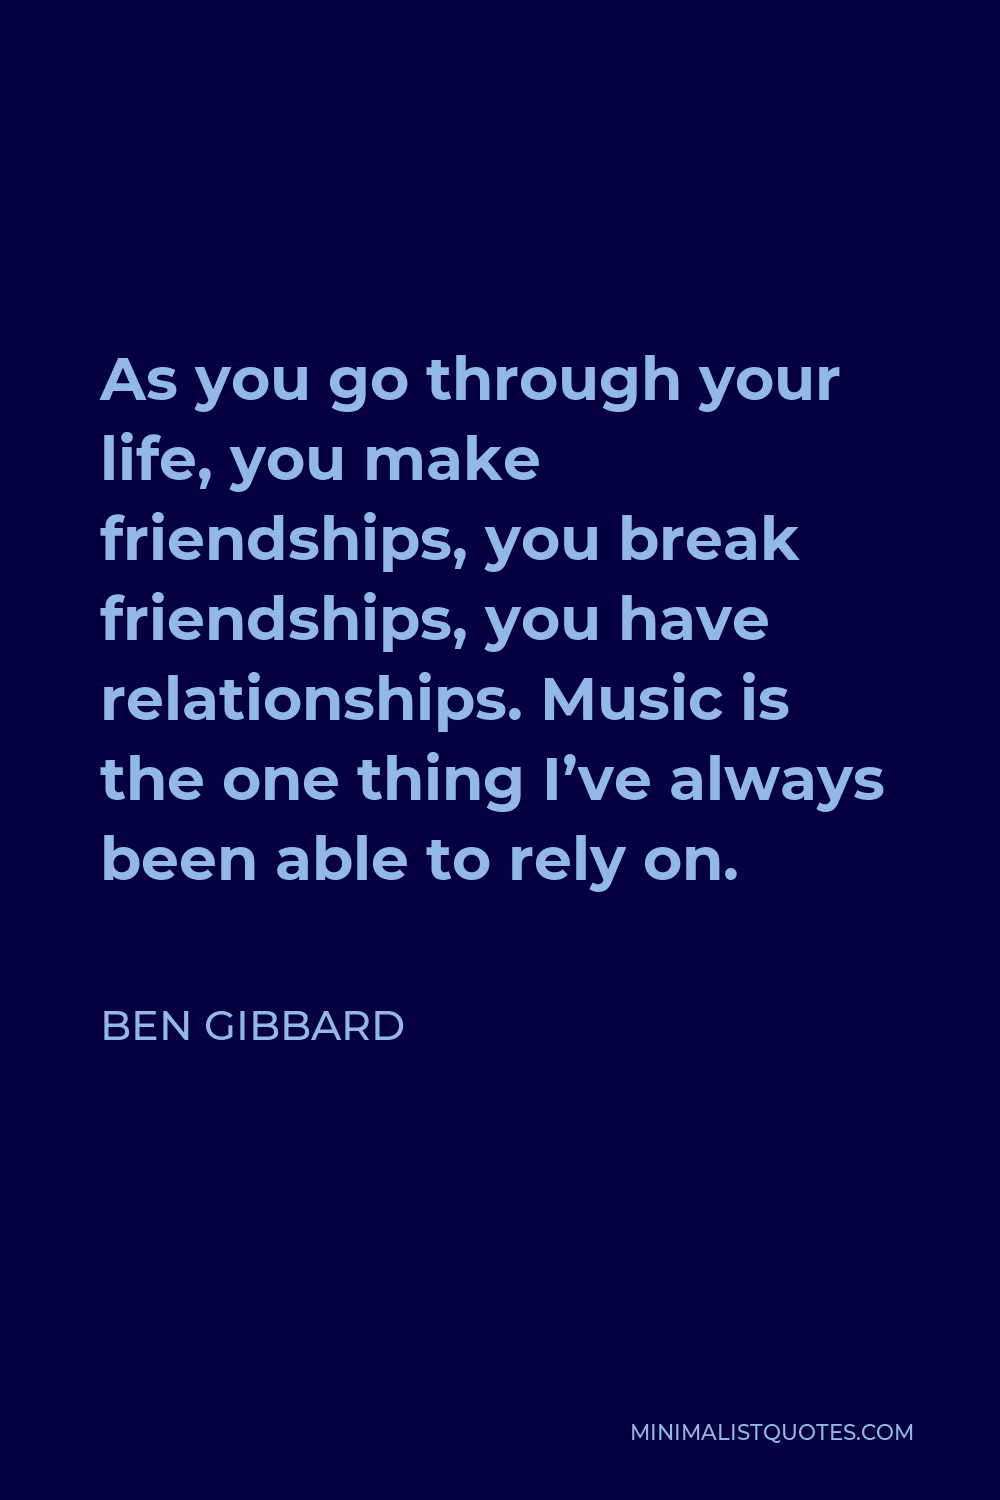 Ben Gibbard Quote - As you go through your life, you make friendships, you break friendships, you have relationships. Music is the one thing I’ve always been able to rely on.